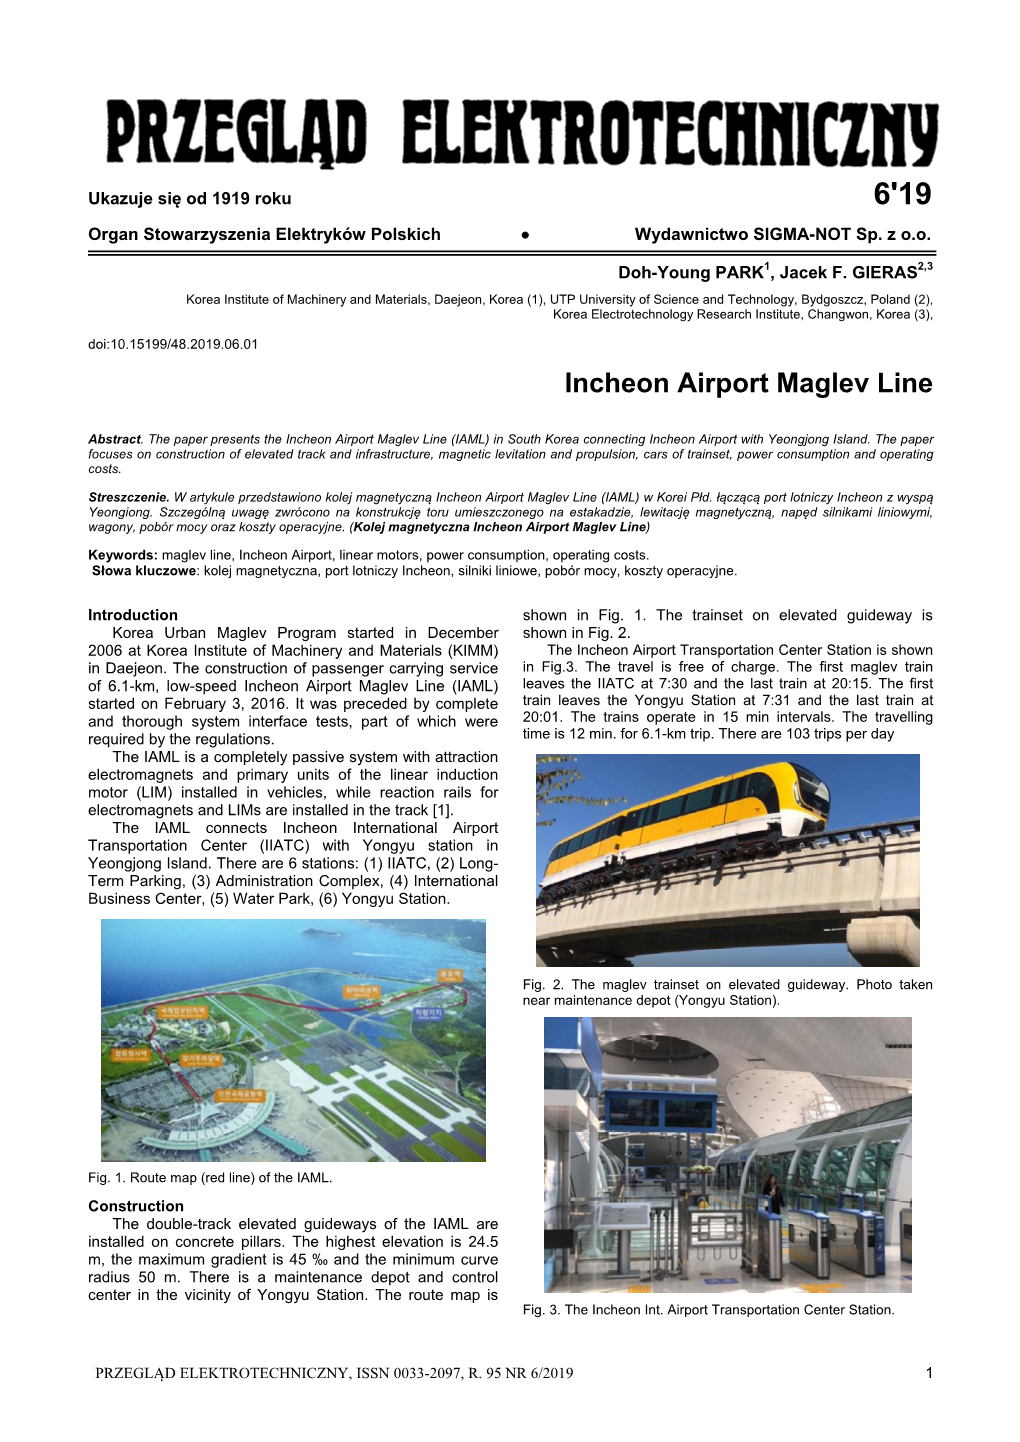 Incheon Airport Maglev Line